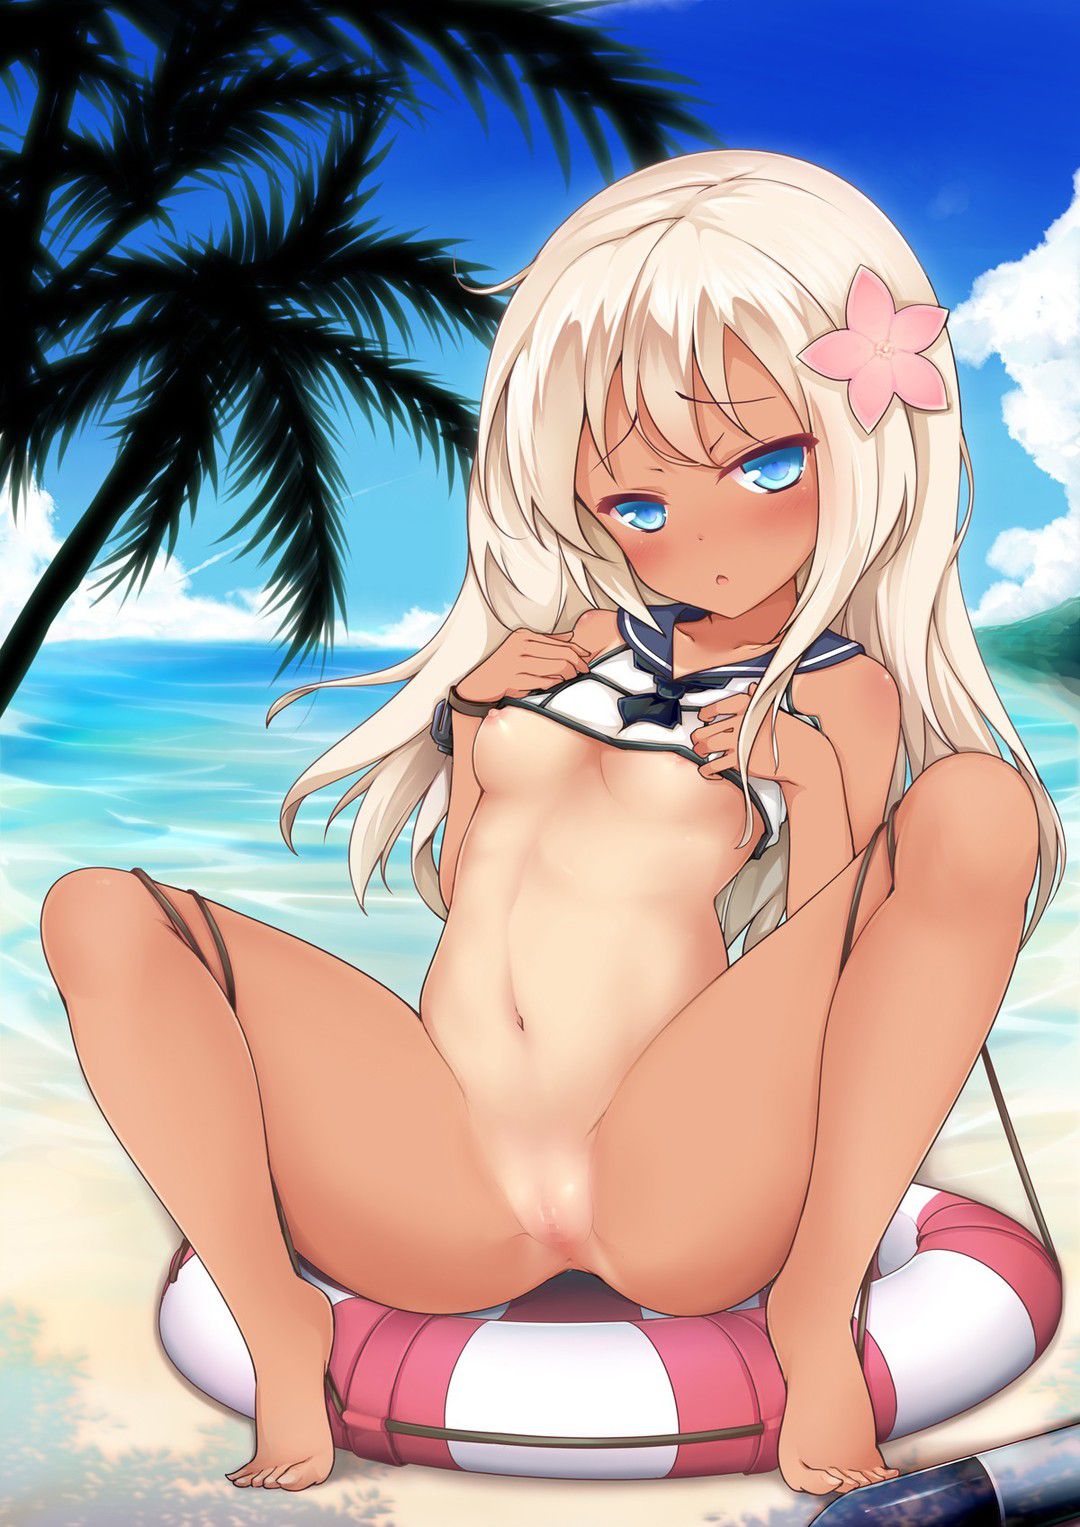 [the second image] put an image of the most erotic character in warship this 7